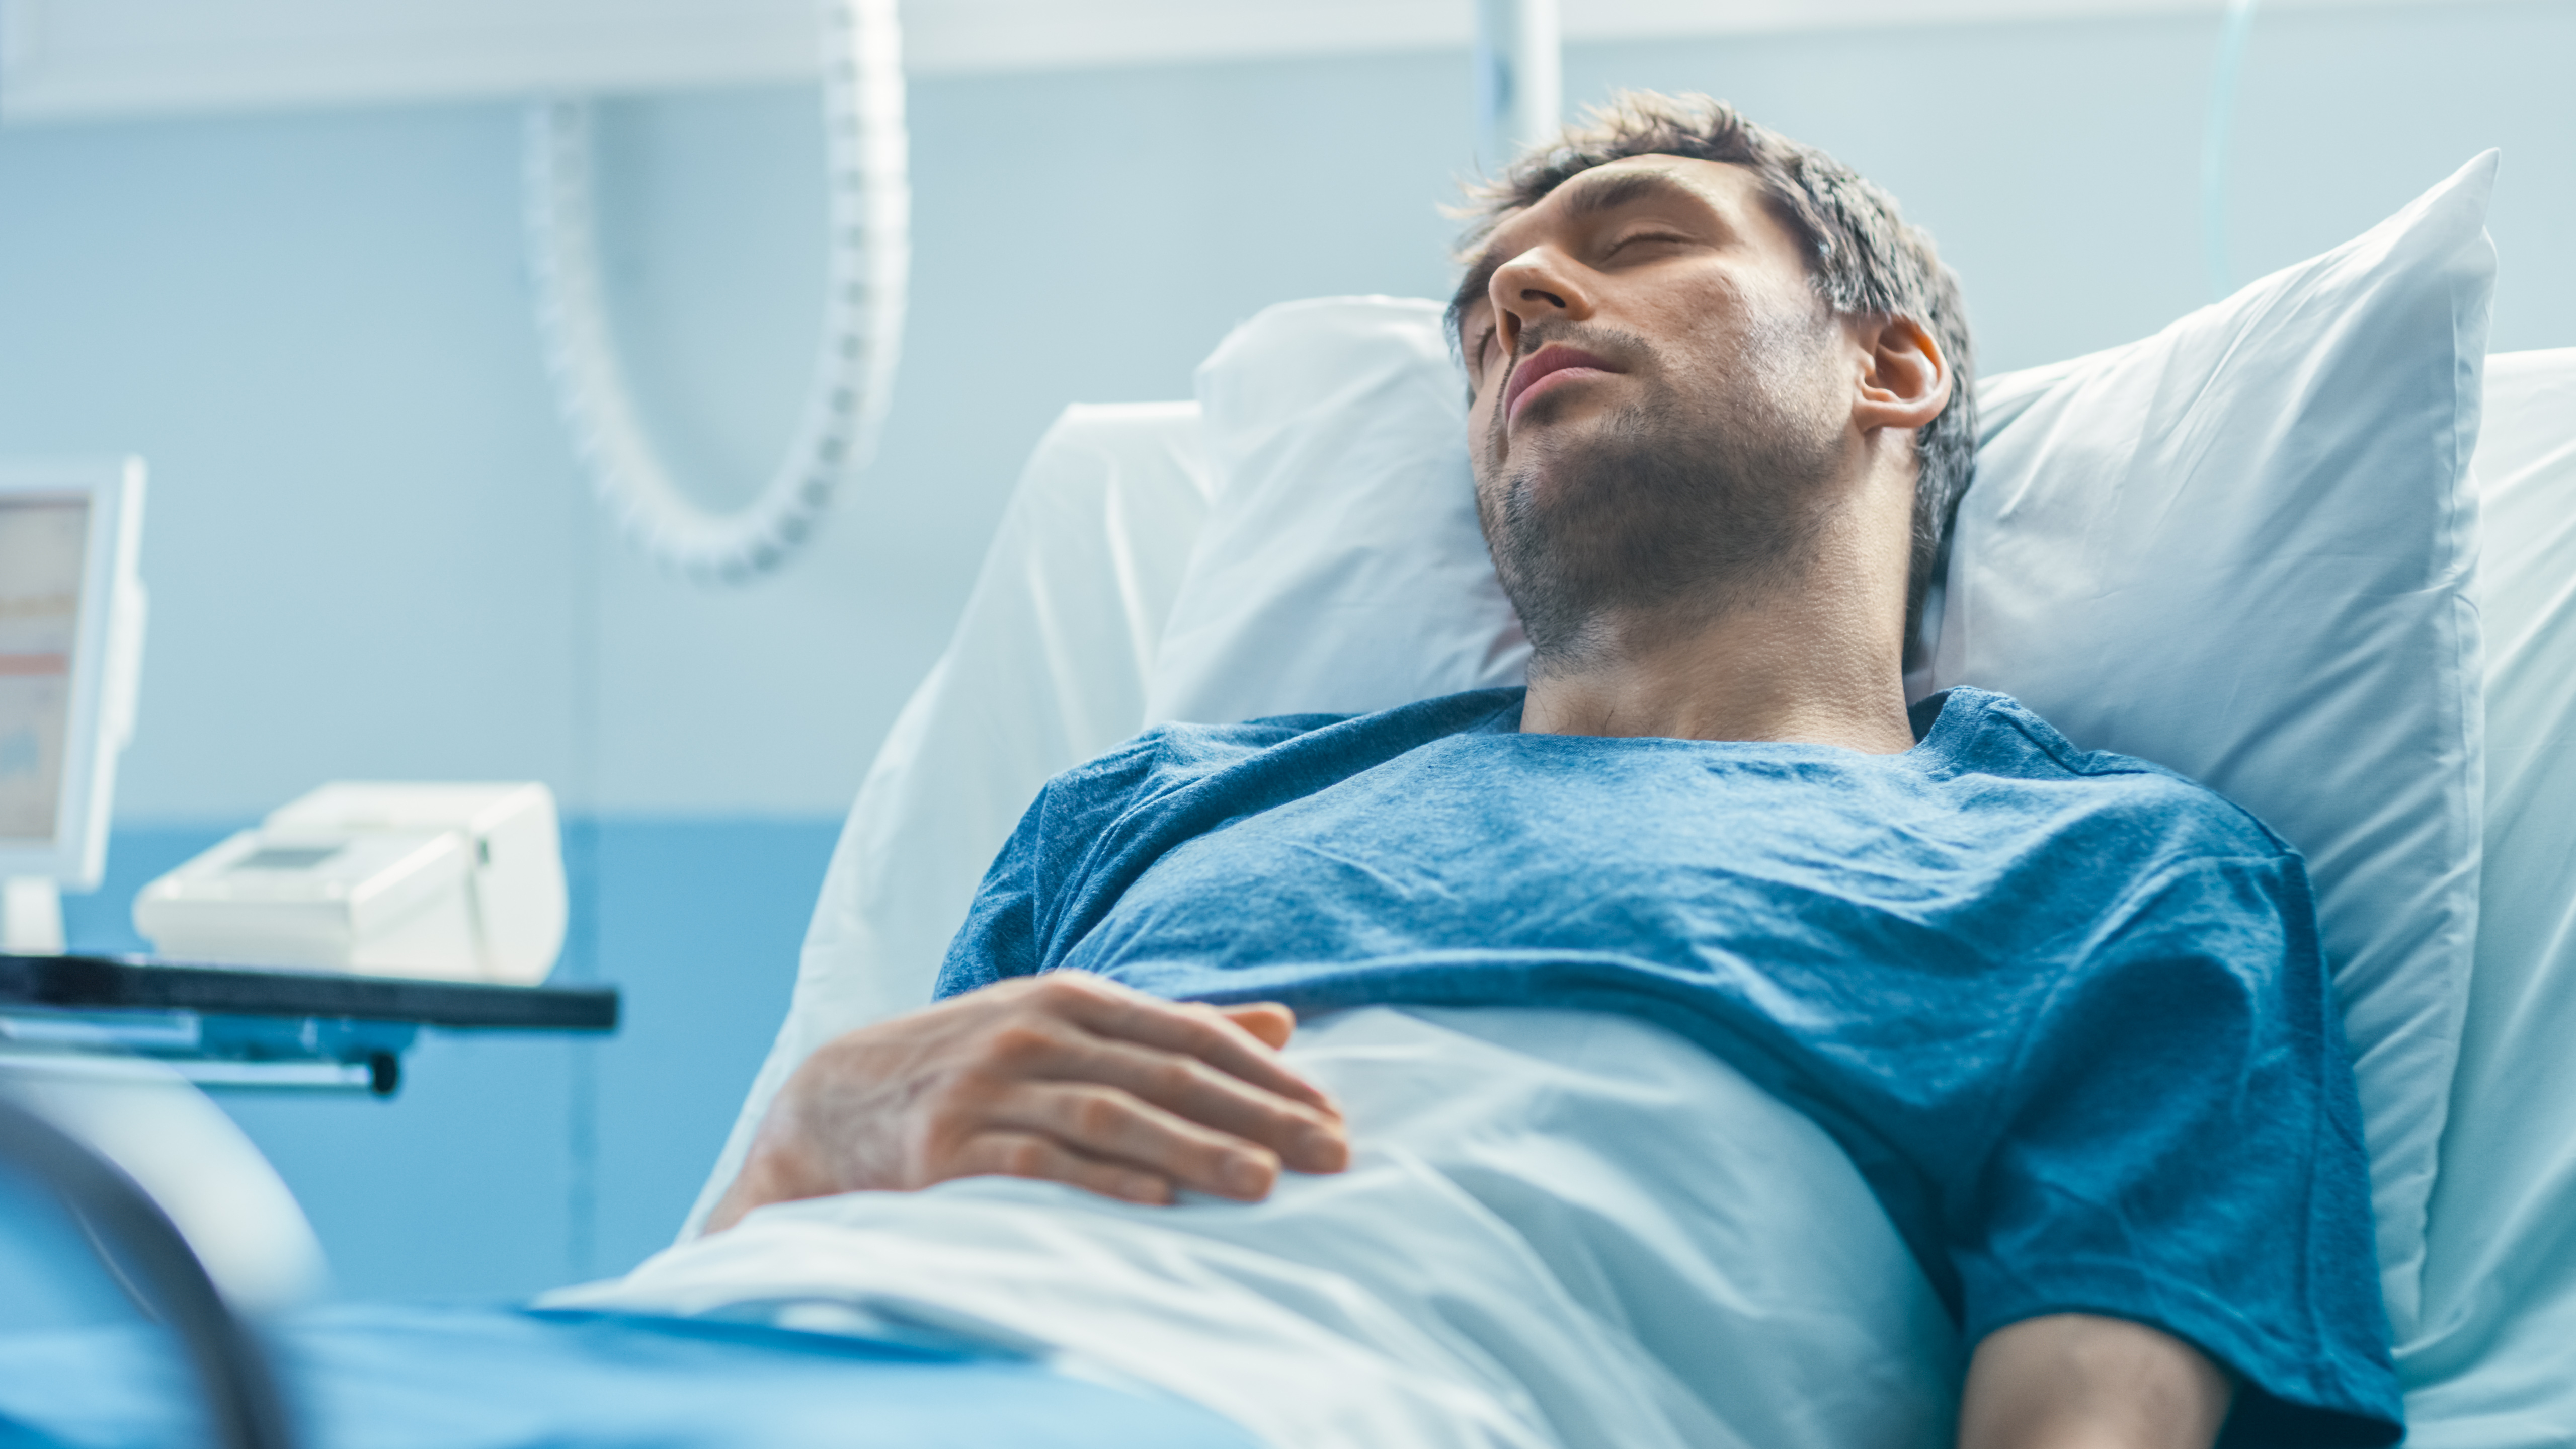 A man in the hospital | Source: Shutterstock